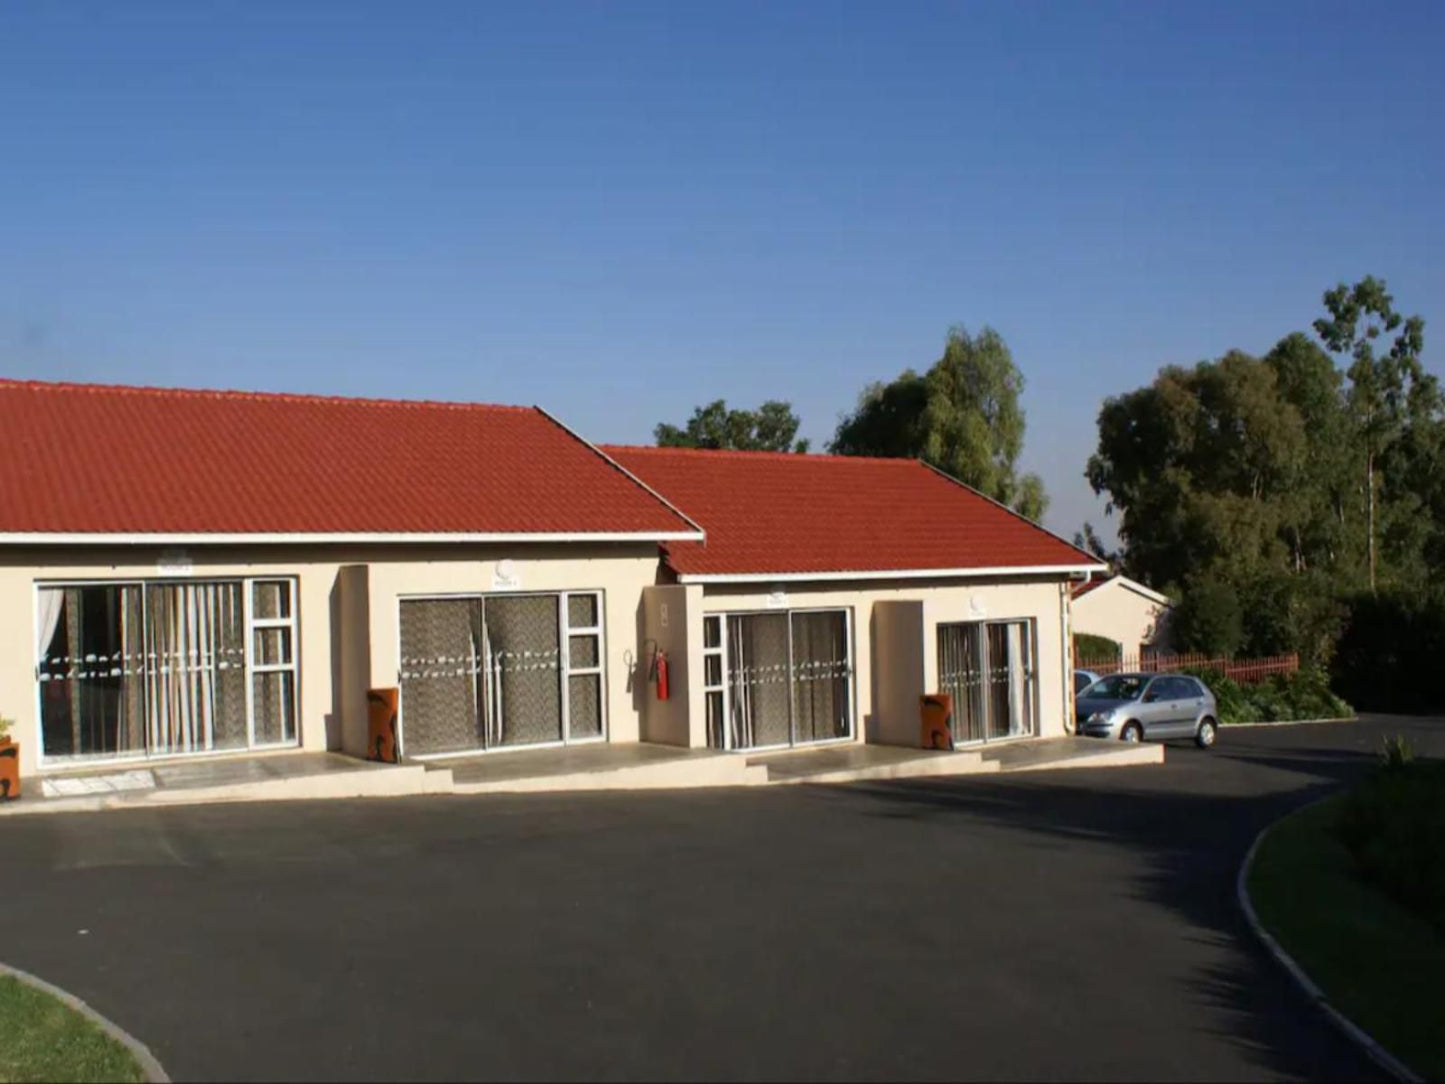 Malembe Lodge Halfway House Johannesburg Gauteng South Africa House, Building, Architecture